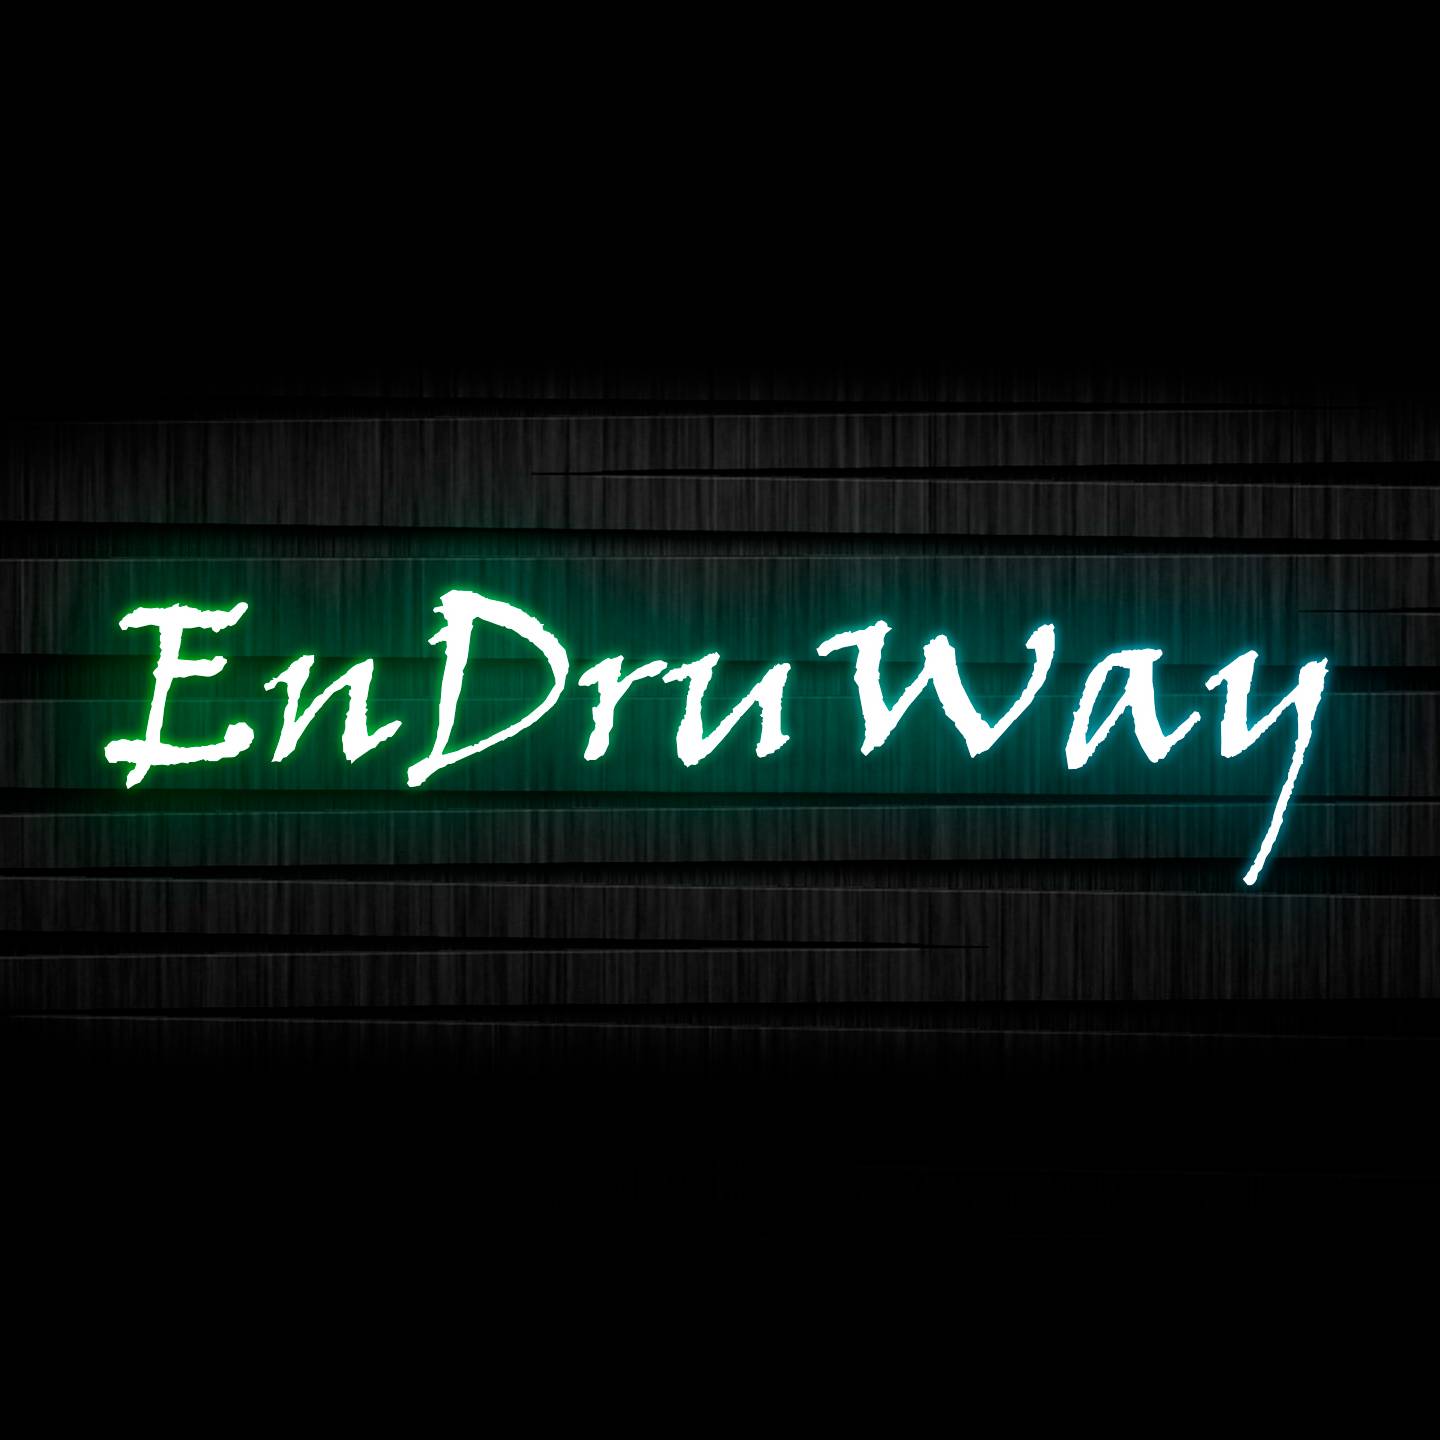 EnDruWay